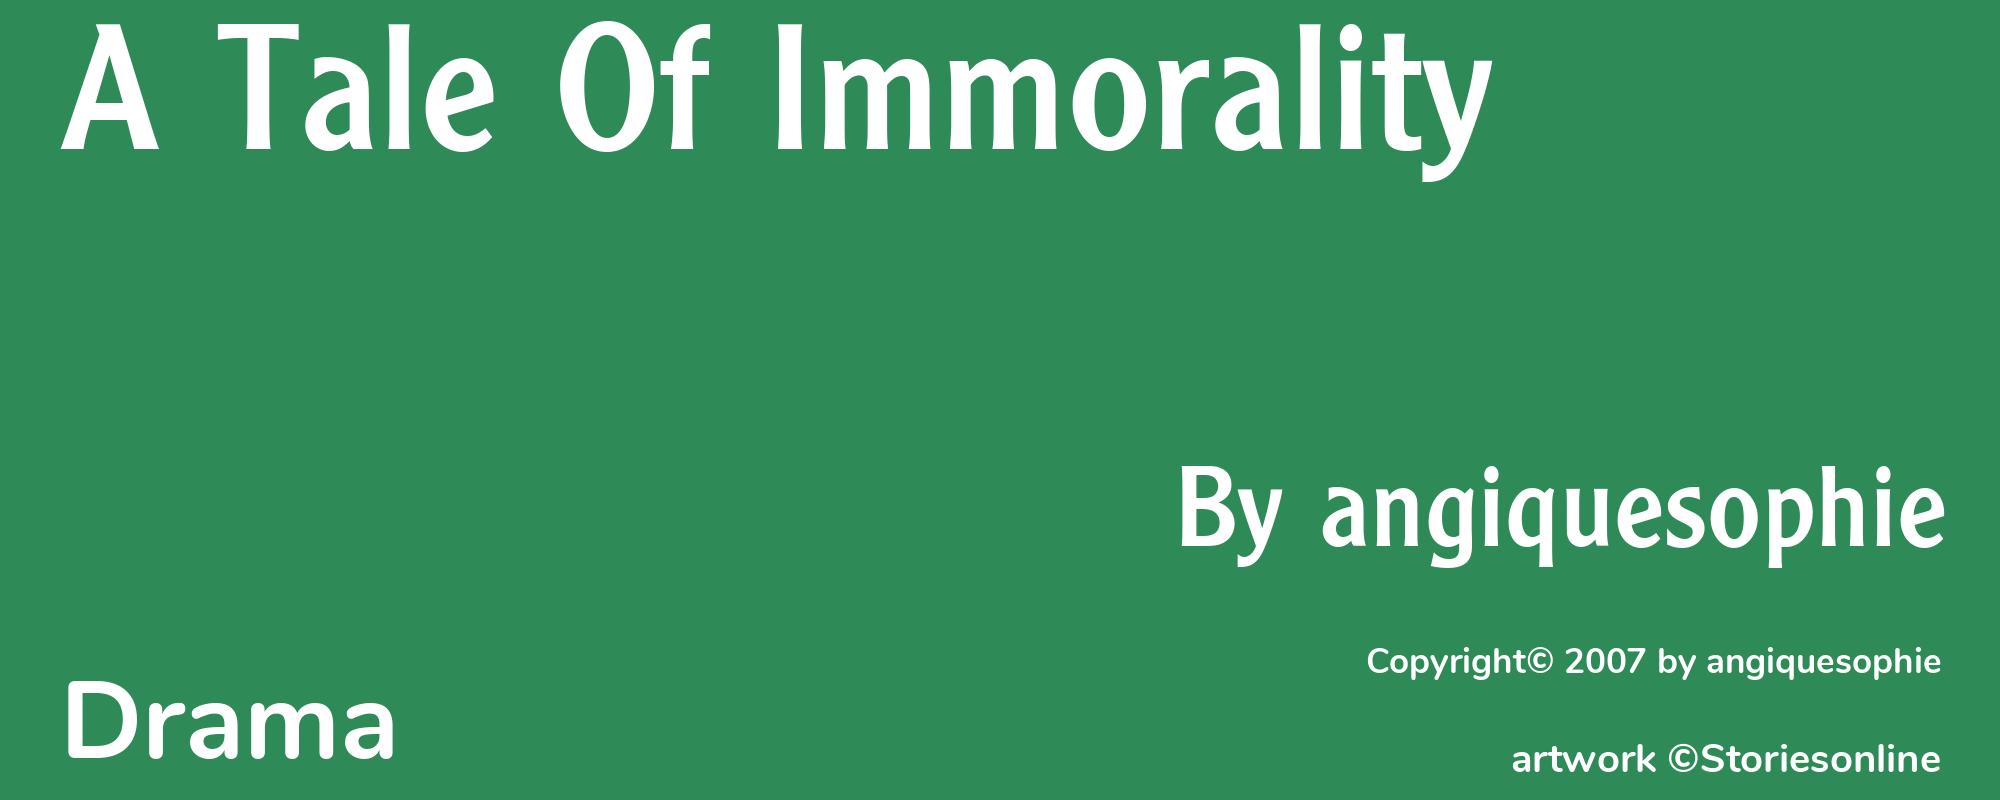 A Tale Of Immorality - Cover